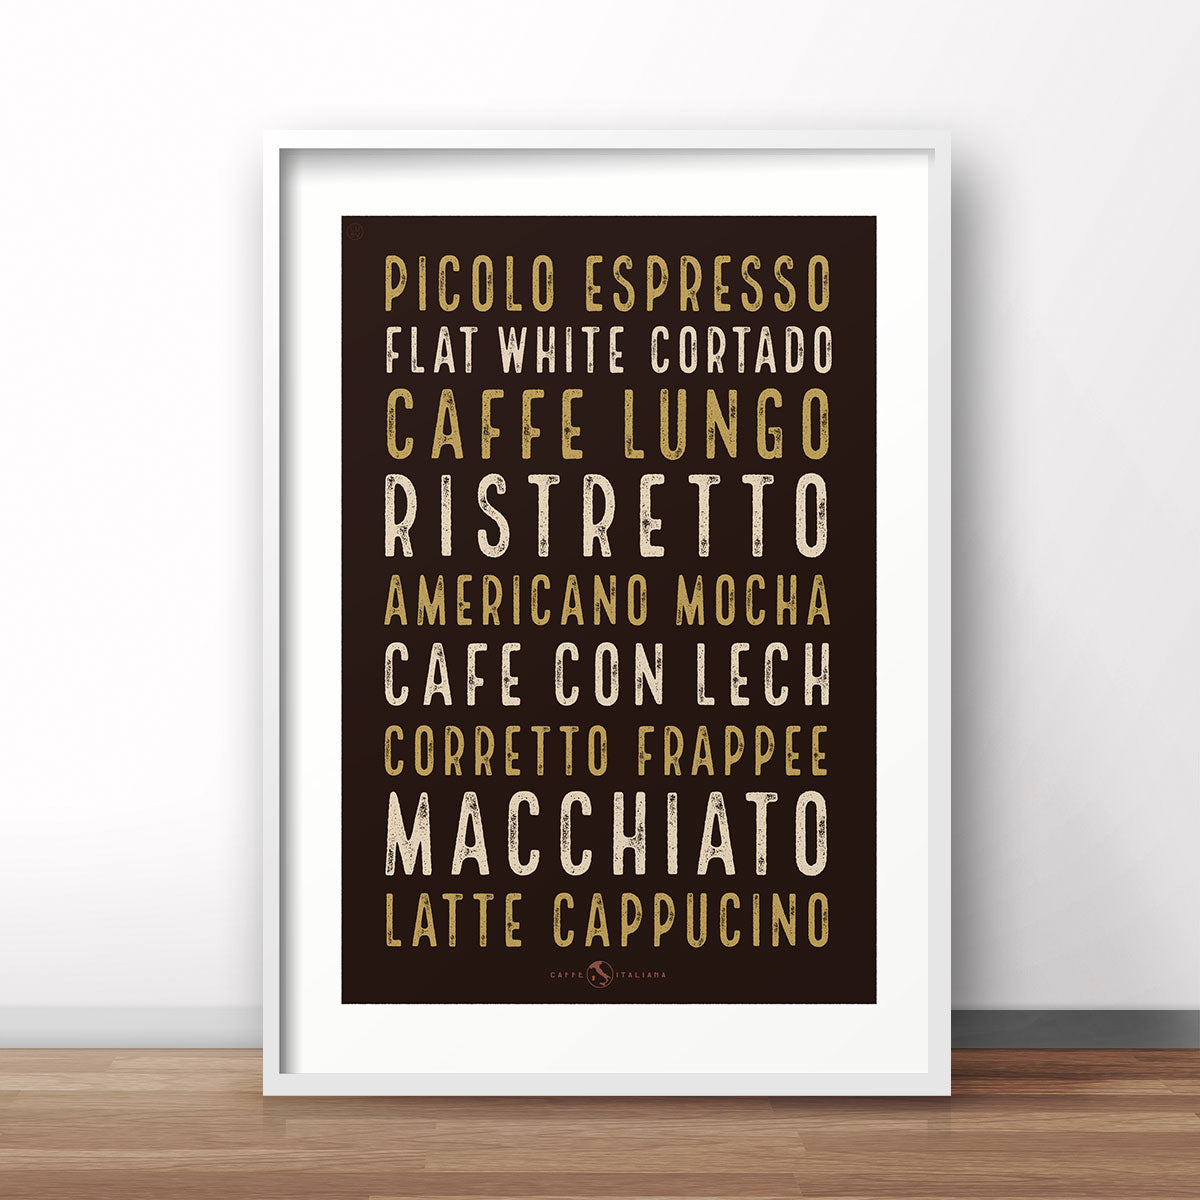 Italian cafe coffee retro poster print from Places We Luv